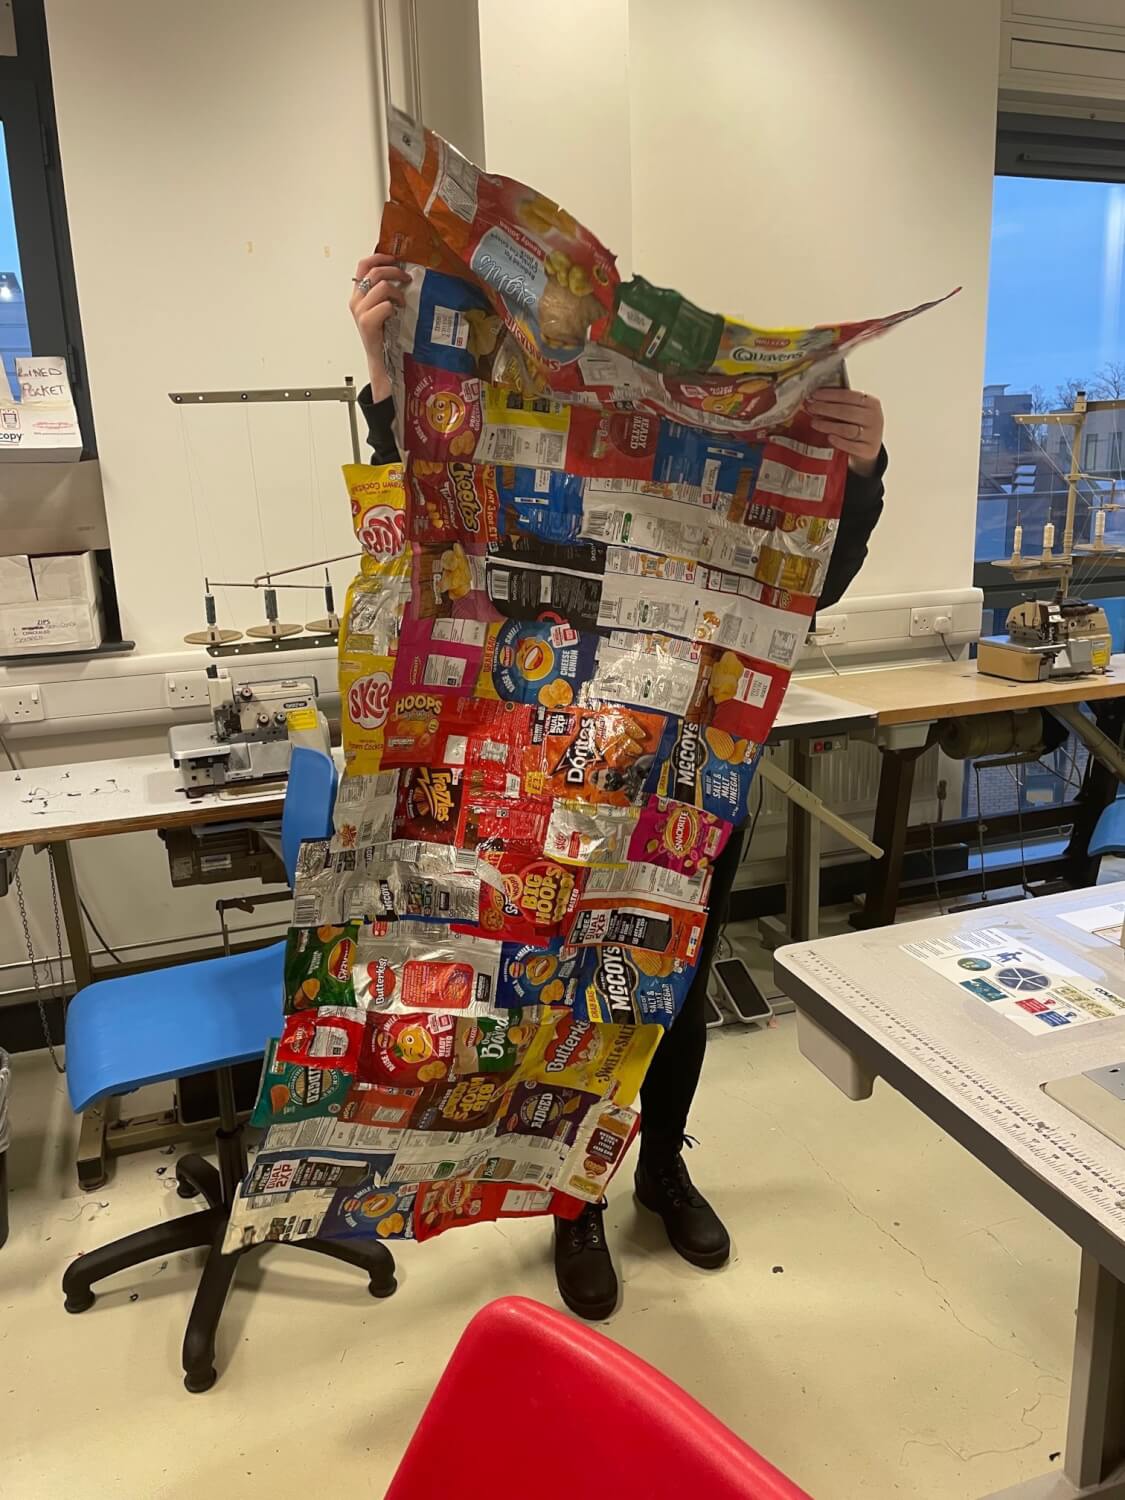 Fashion student displaying sleeping bag made from crisp packets